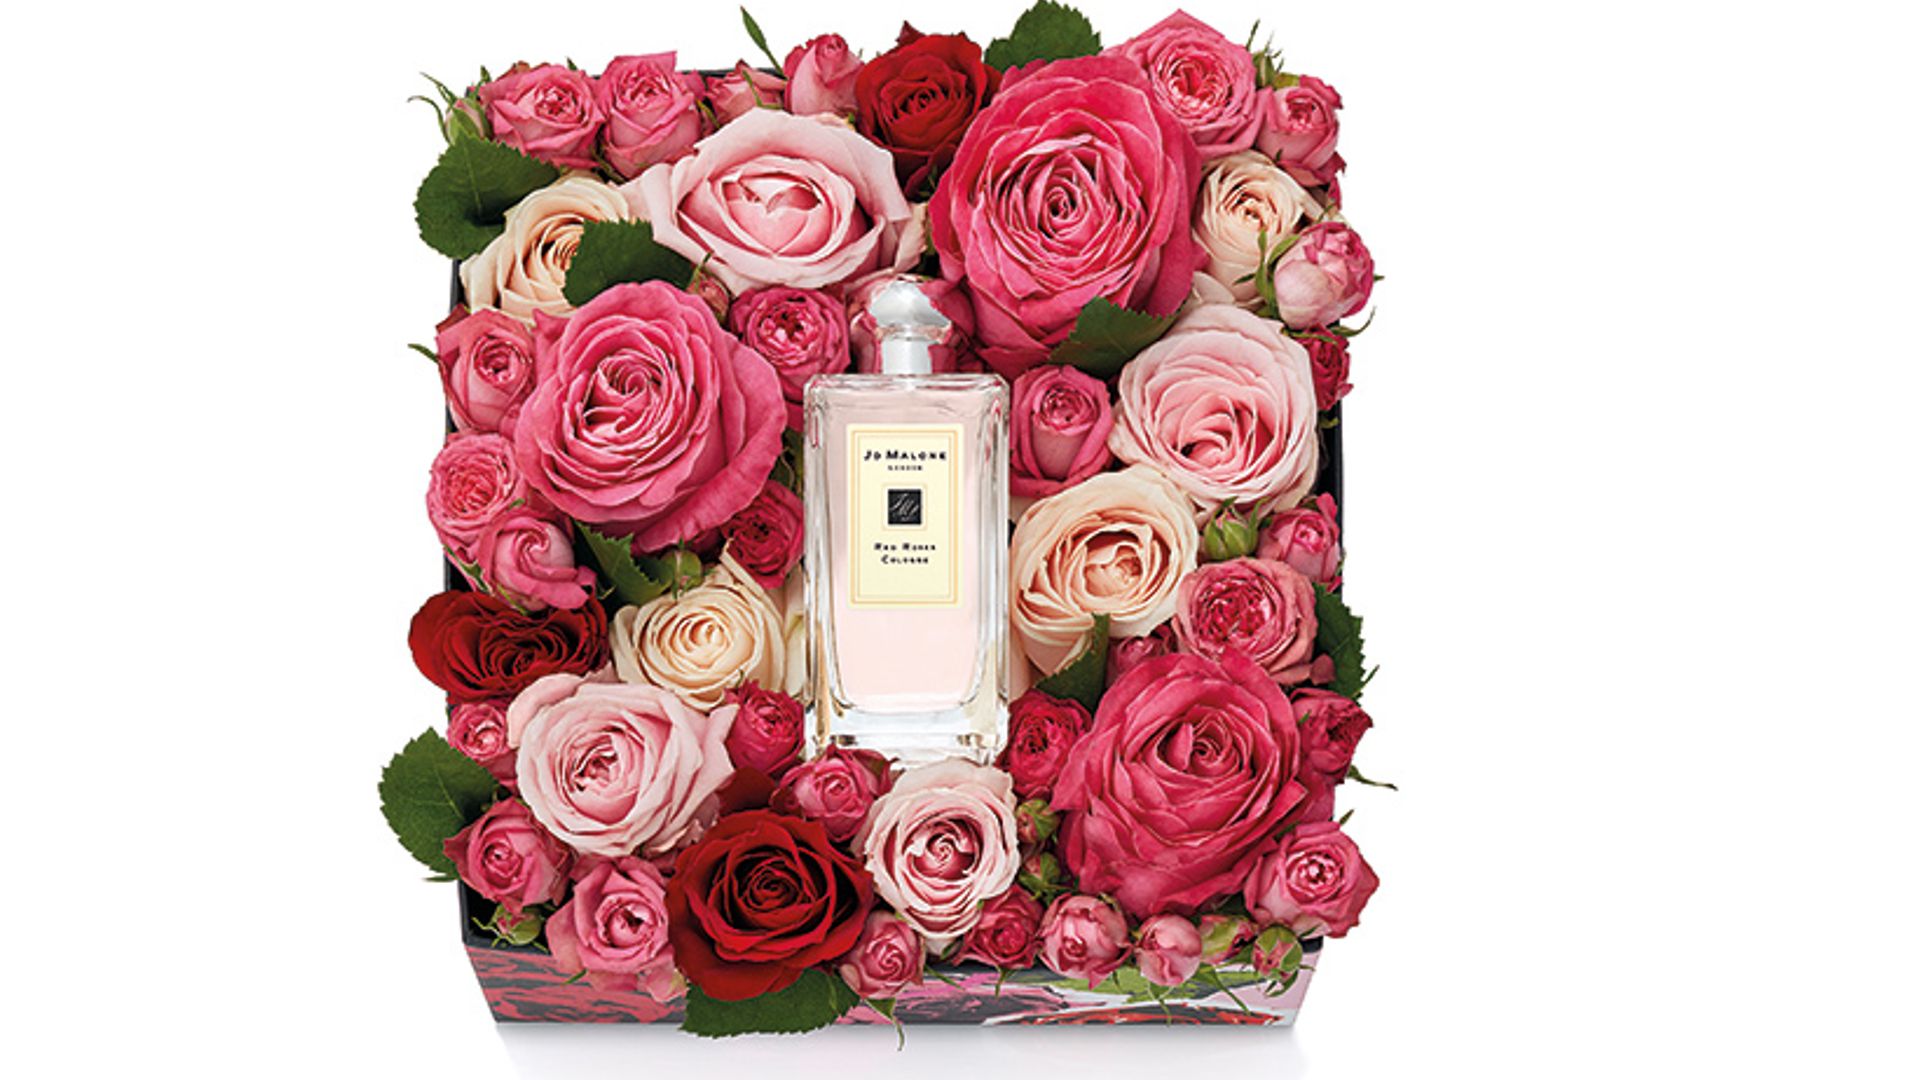 The prettiest Valentine's Day gifts for the beauty fan!